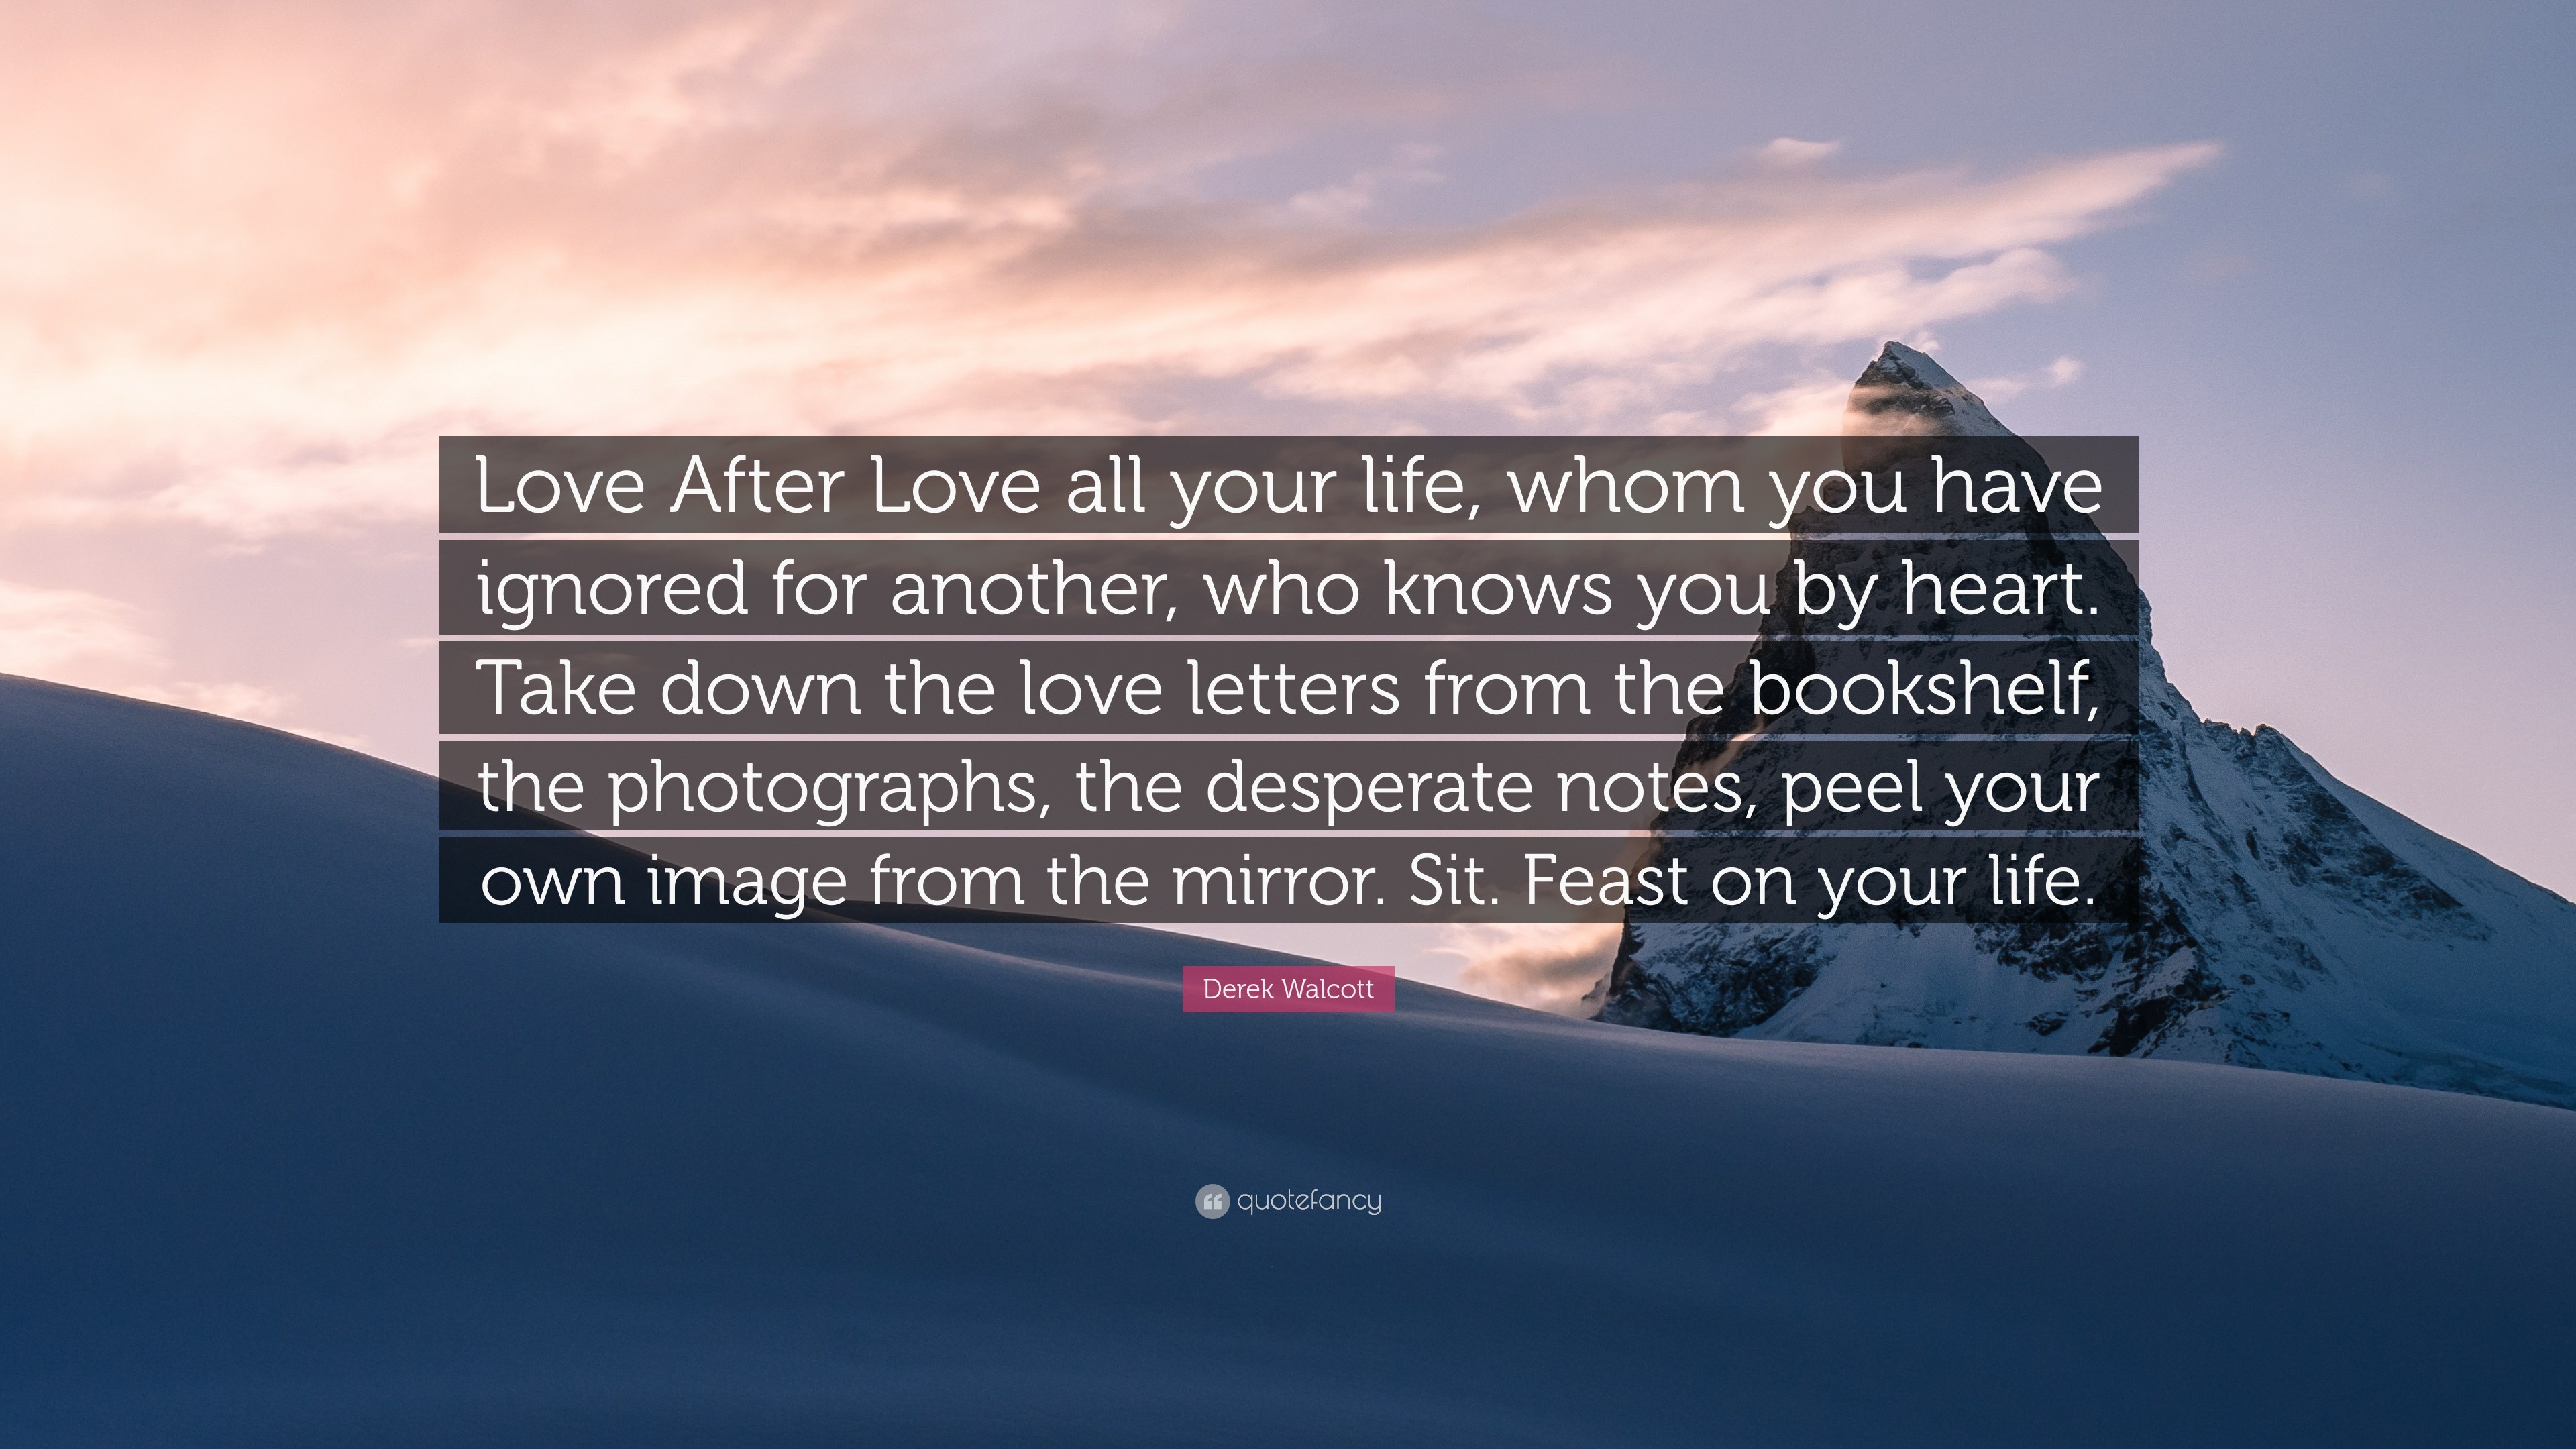 Derek Walcott Quote “Love After Love all your life whom you have ignored